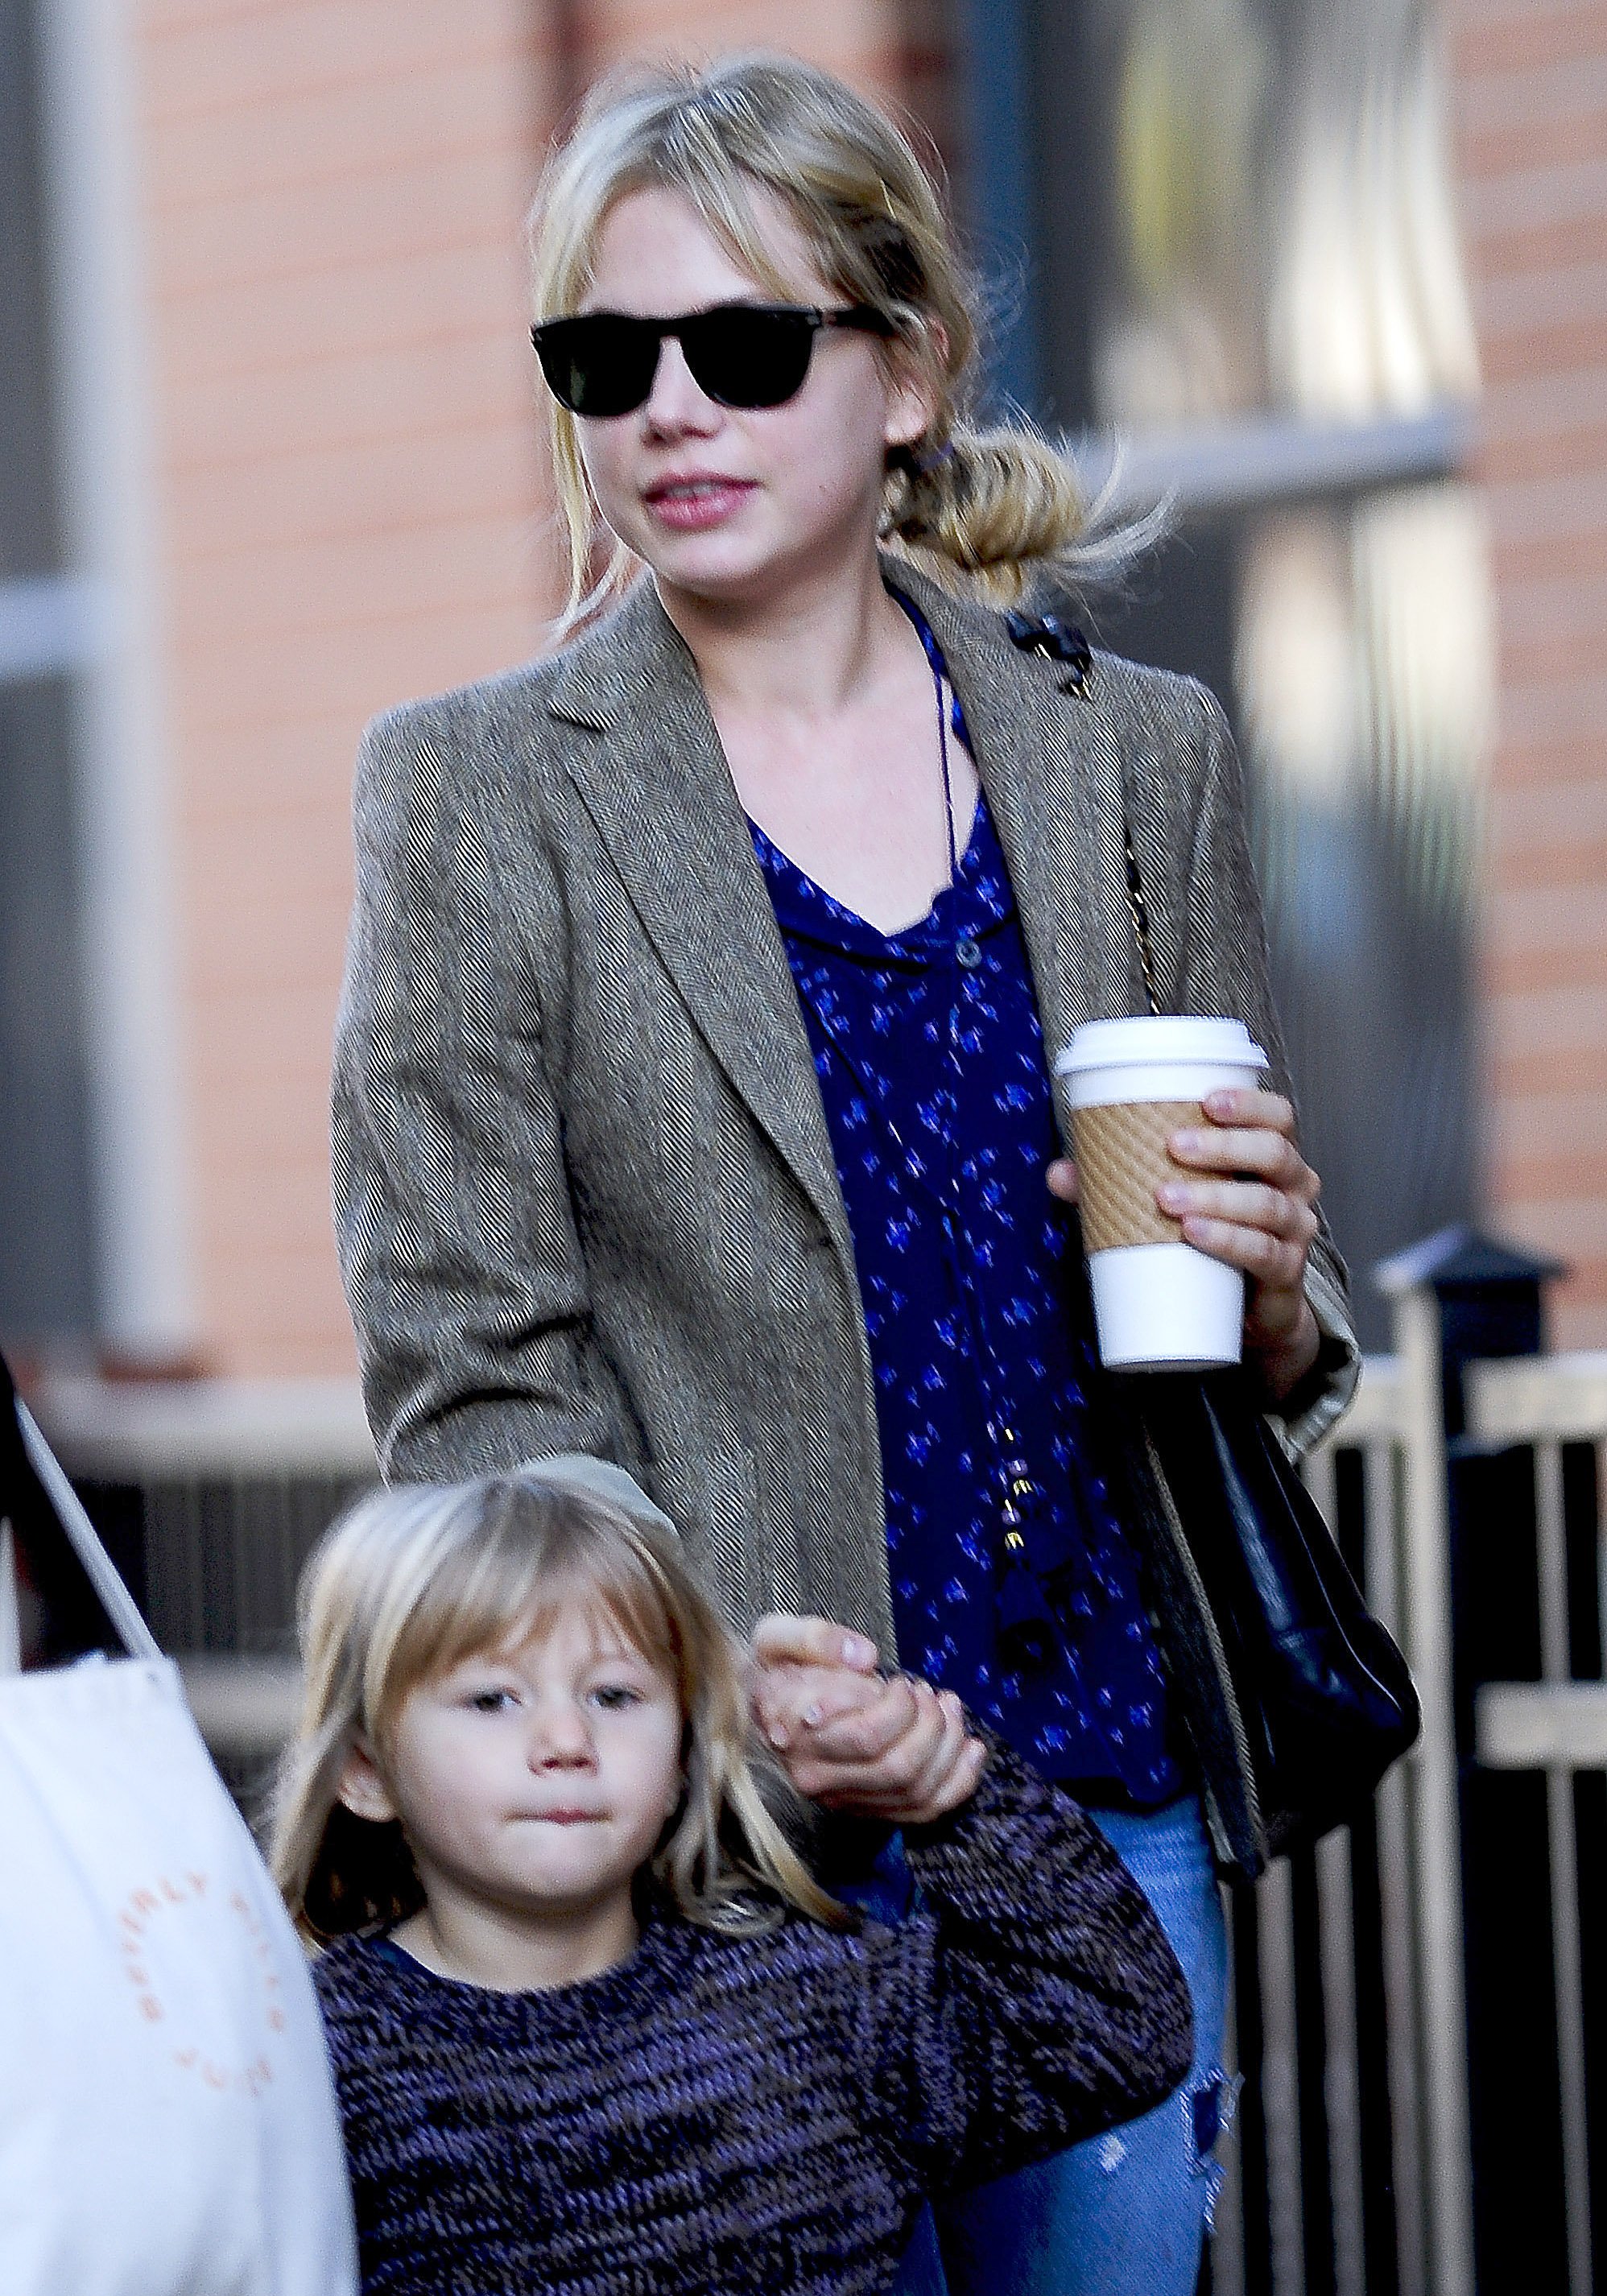 Heath Ledger's daughter Matilda with her mother Michelle Williams in New York City on October 30, 2009 | Source: Getty Images